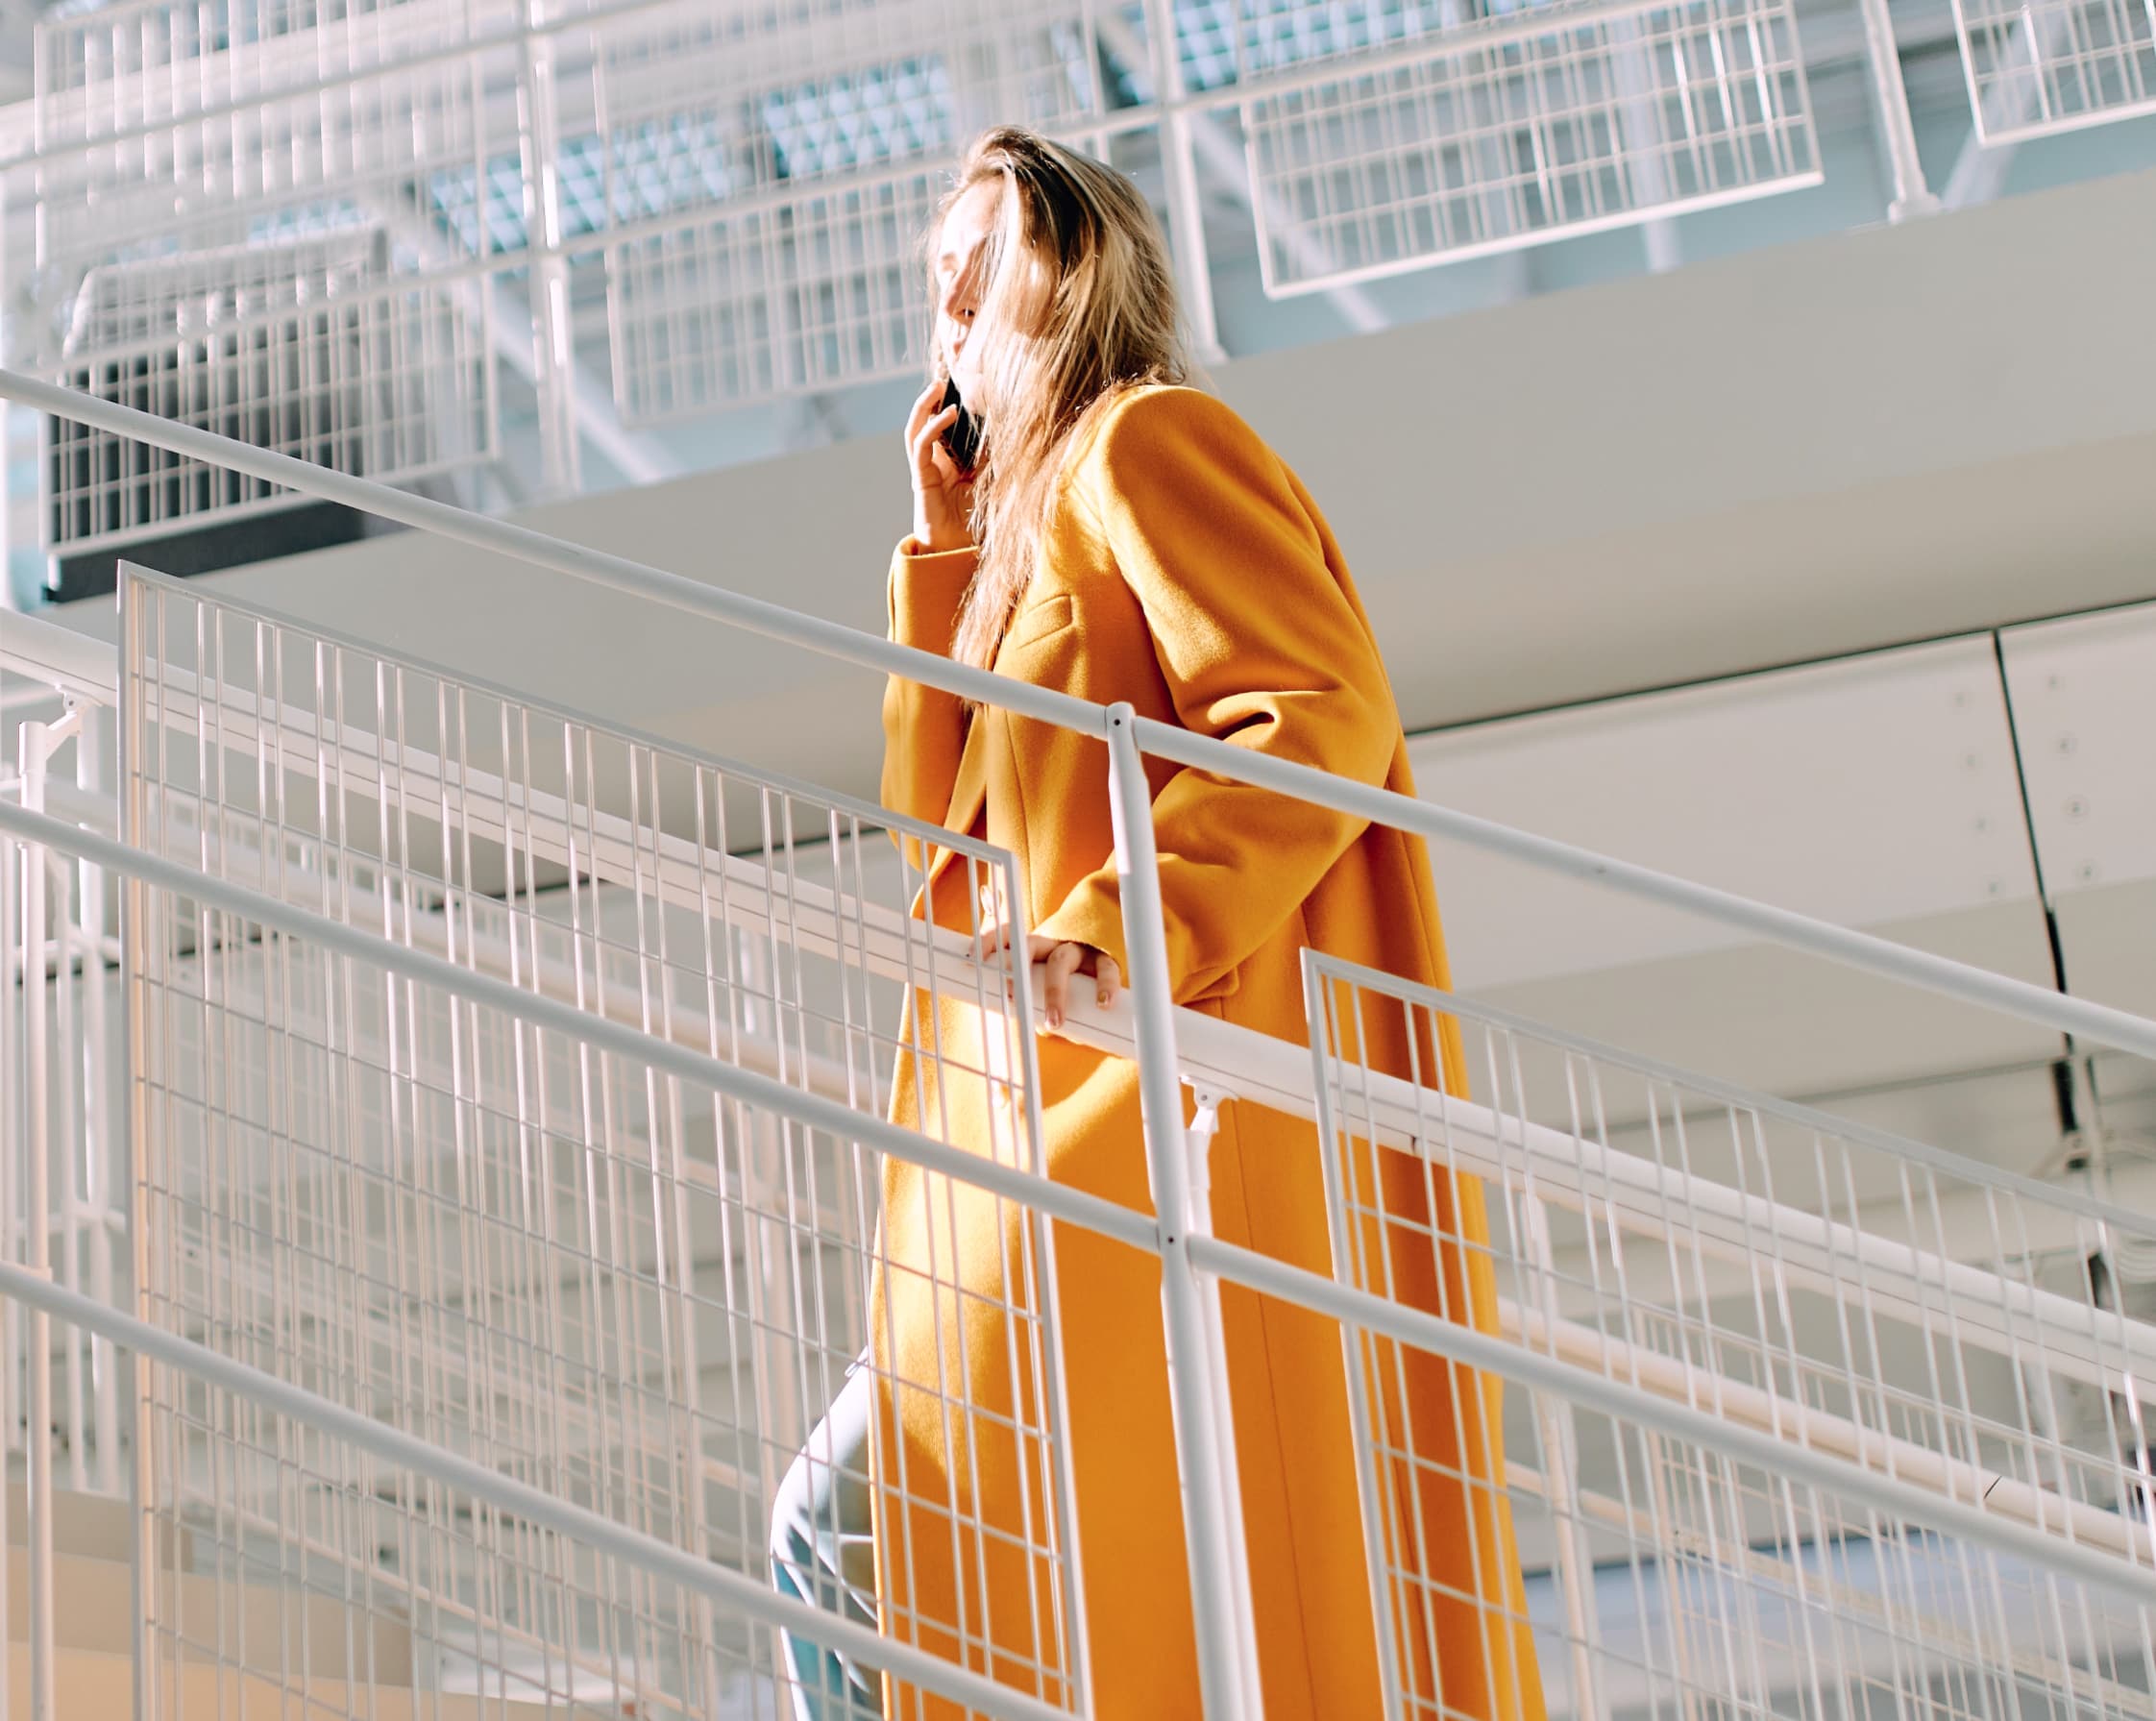 A woman in an orange coat is walking up the stairs to the next step in her career